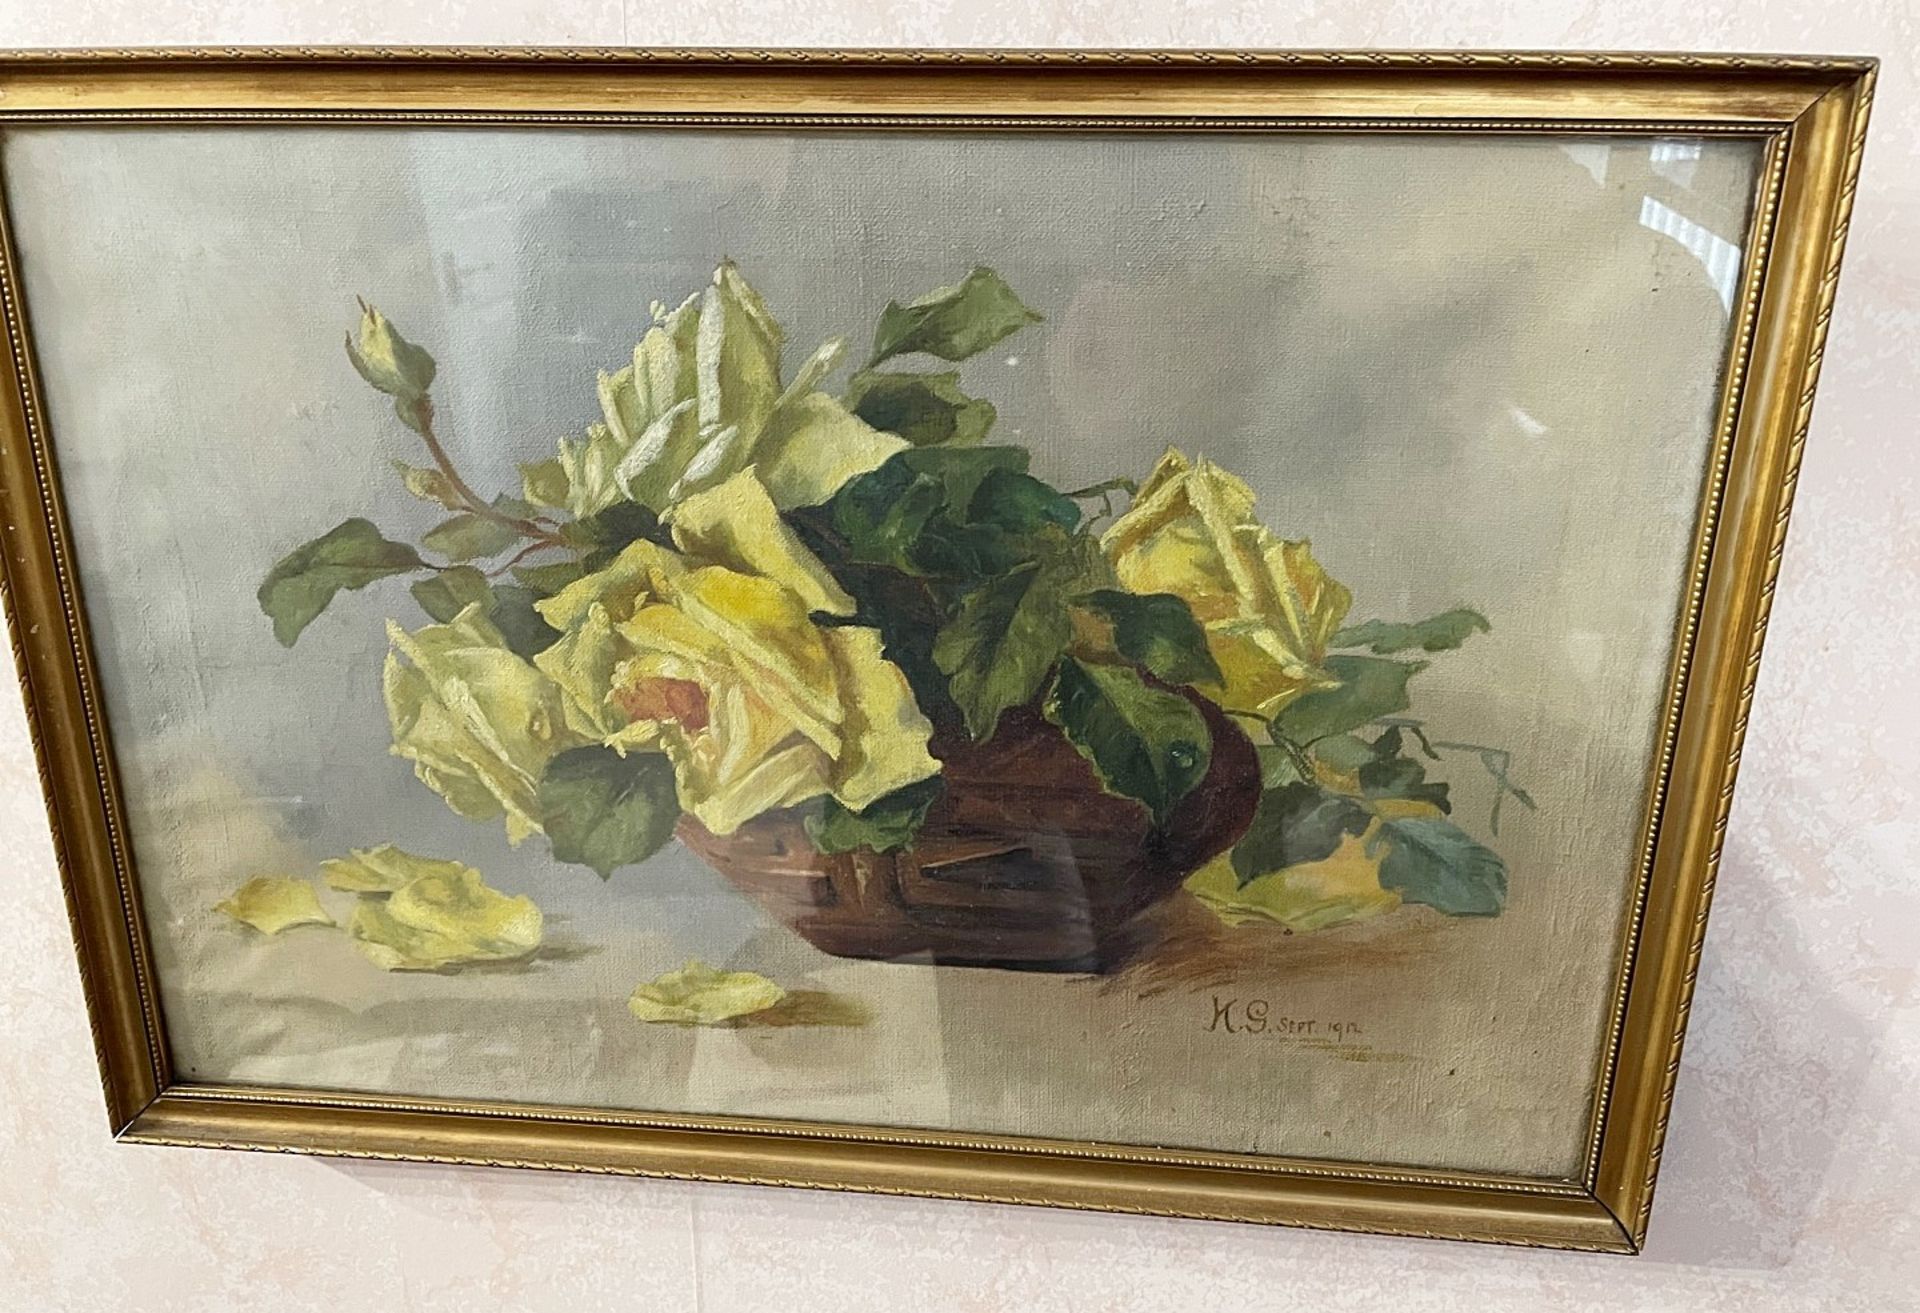 1 x Original Painting Of Yellow Roses - Signed 'K.S. Sept 1912' - Dimensions: 49 x 34cm - From An